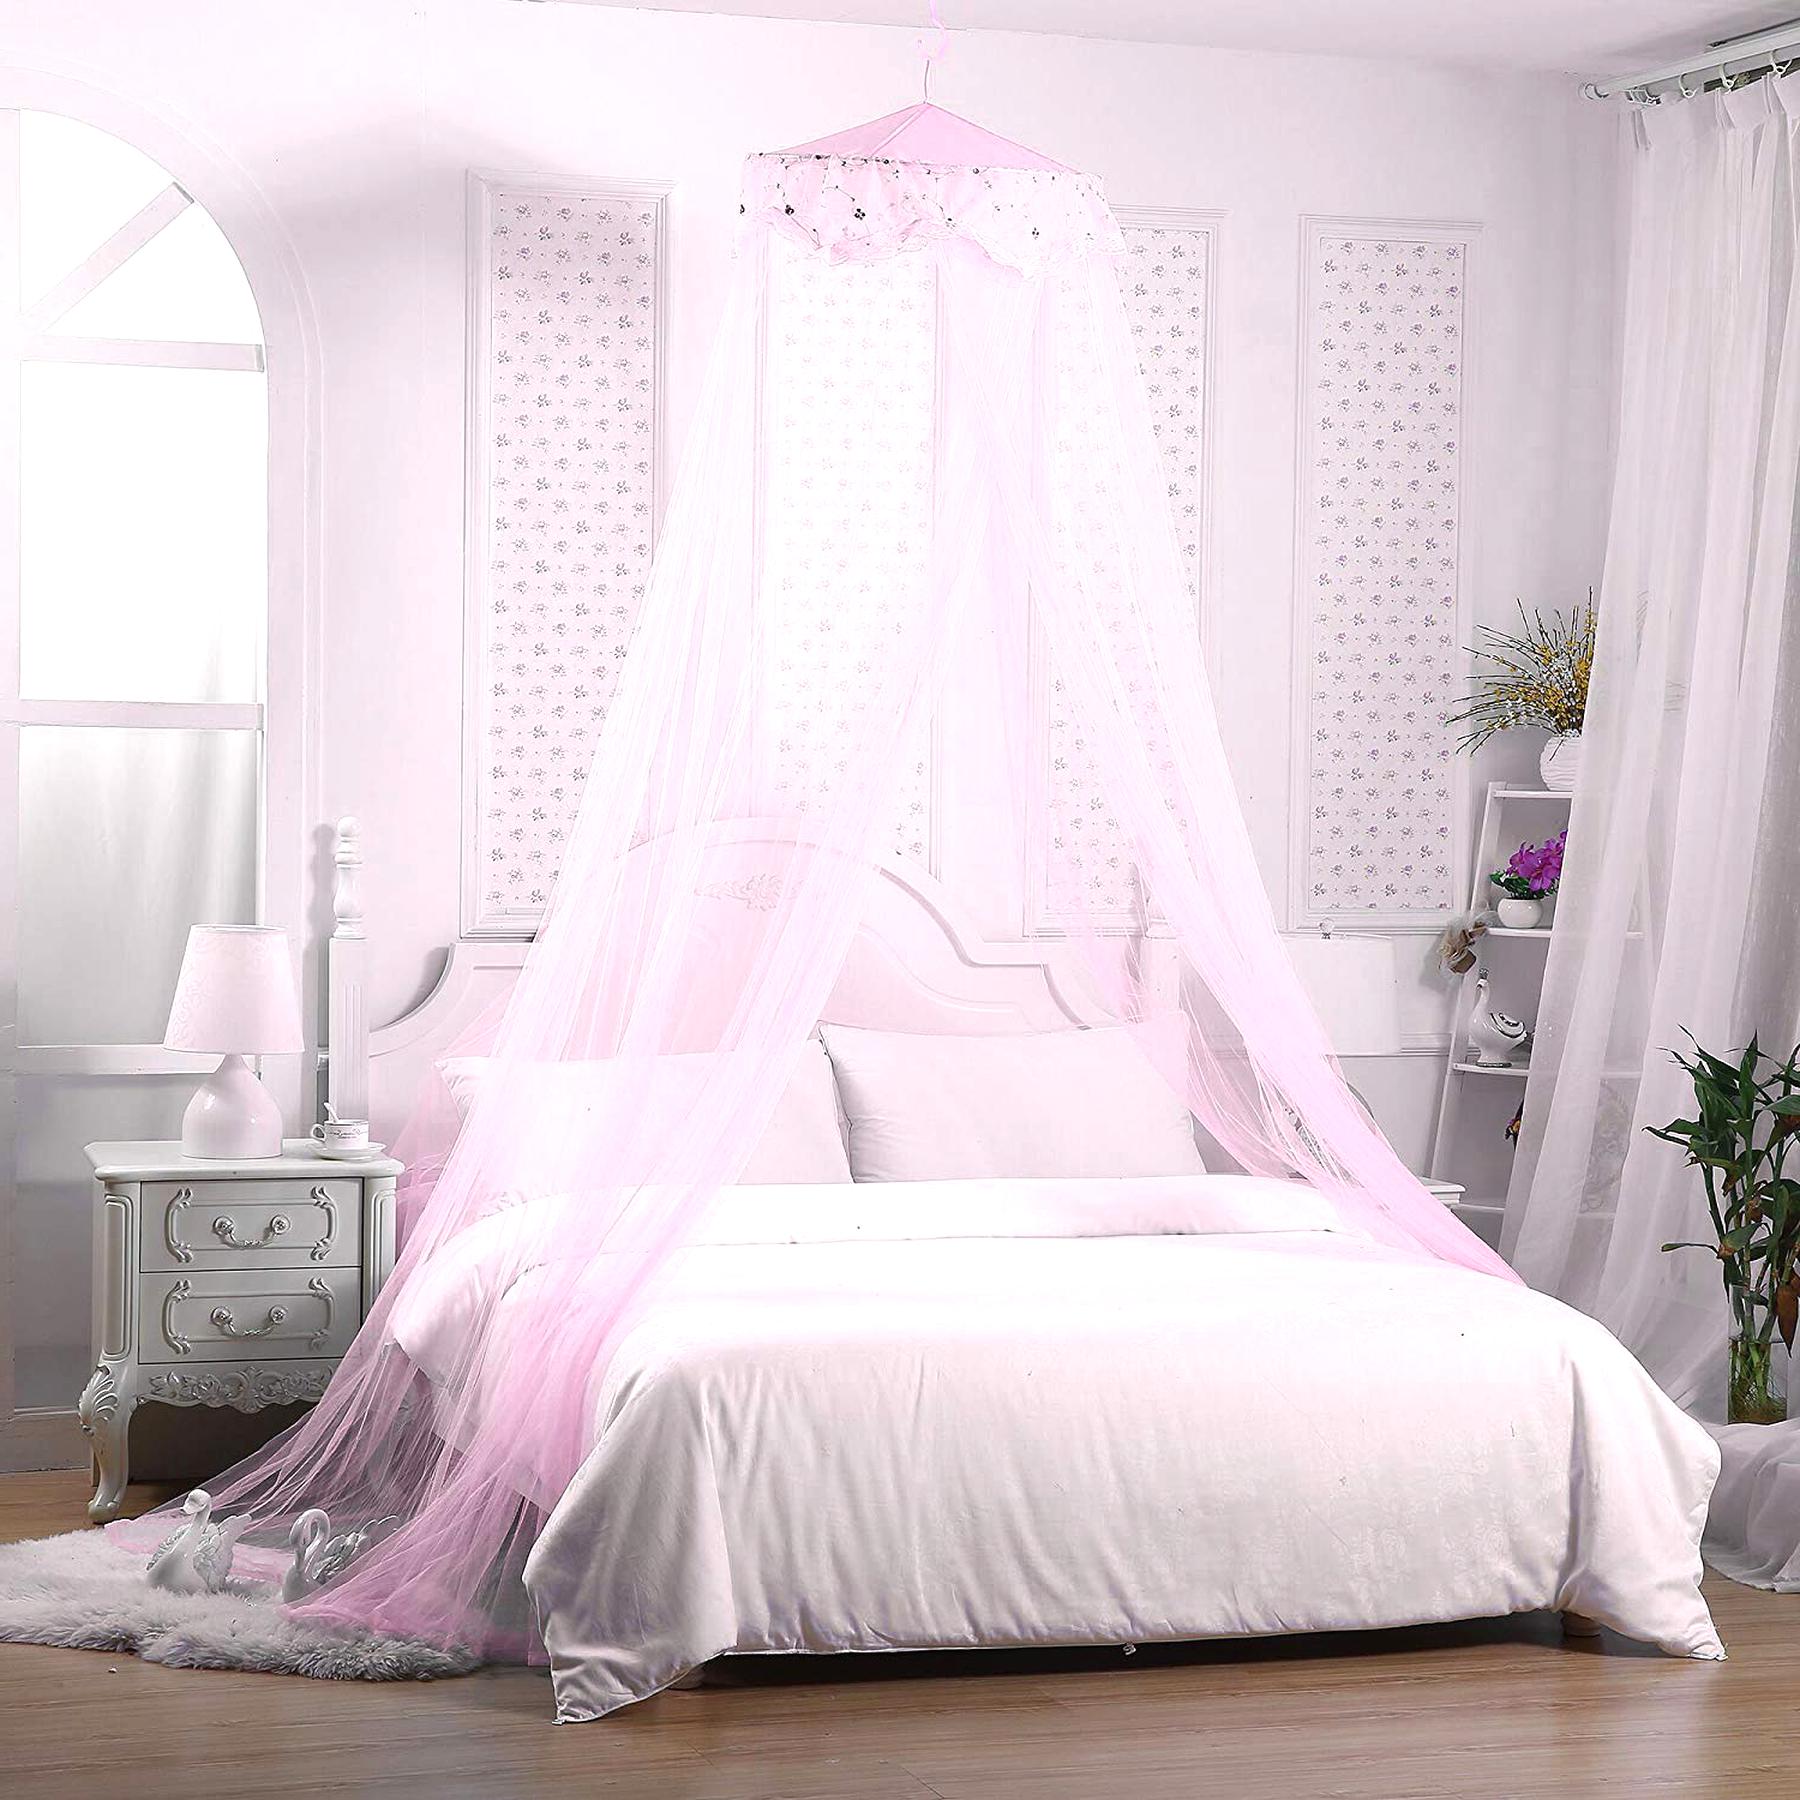 Bed Canopy For Sale In UK 42 Second Hand Bed Canopys